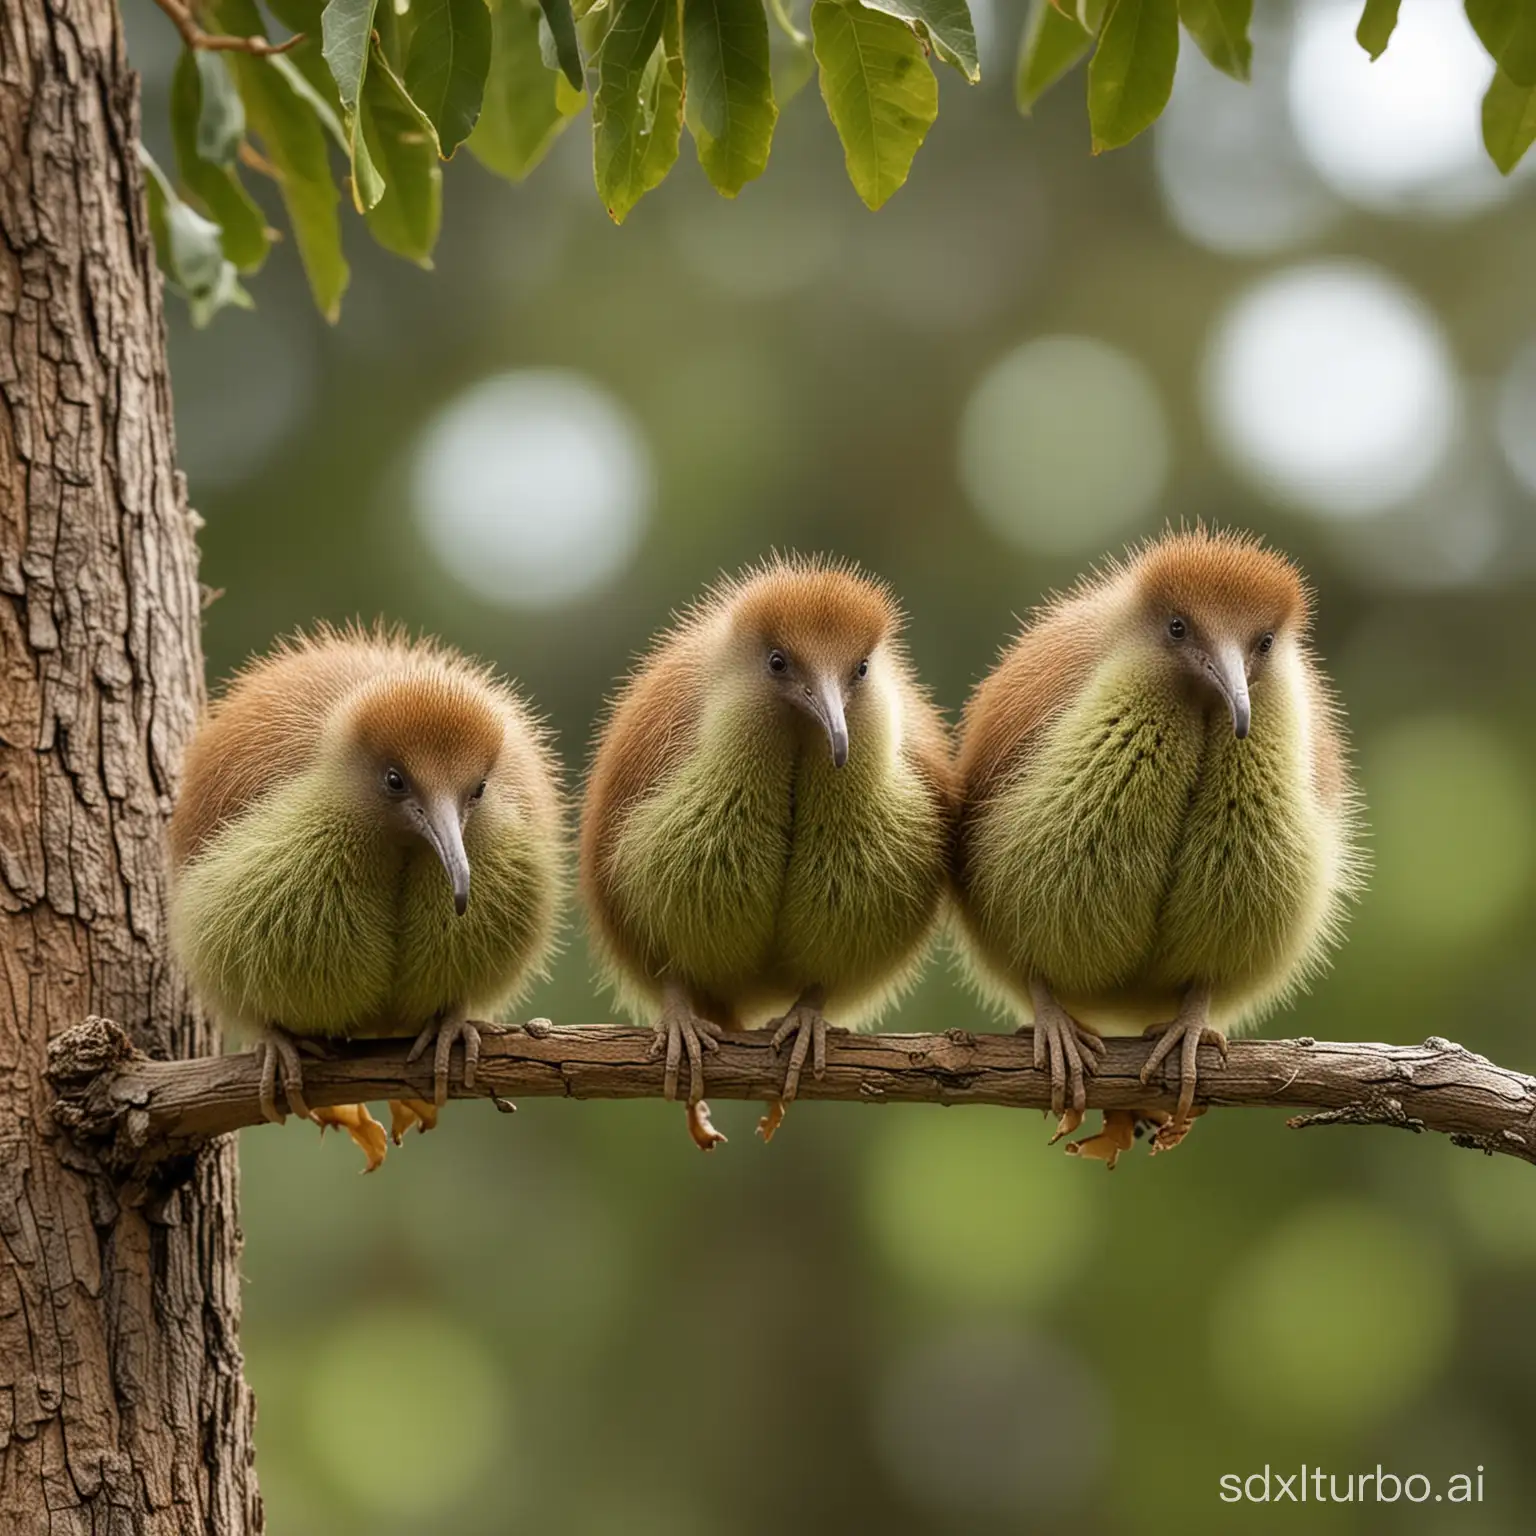 3 Kiwi birds with 6 legs, on a nut tree, looking for nuts, and eating nuts